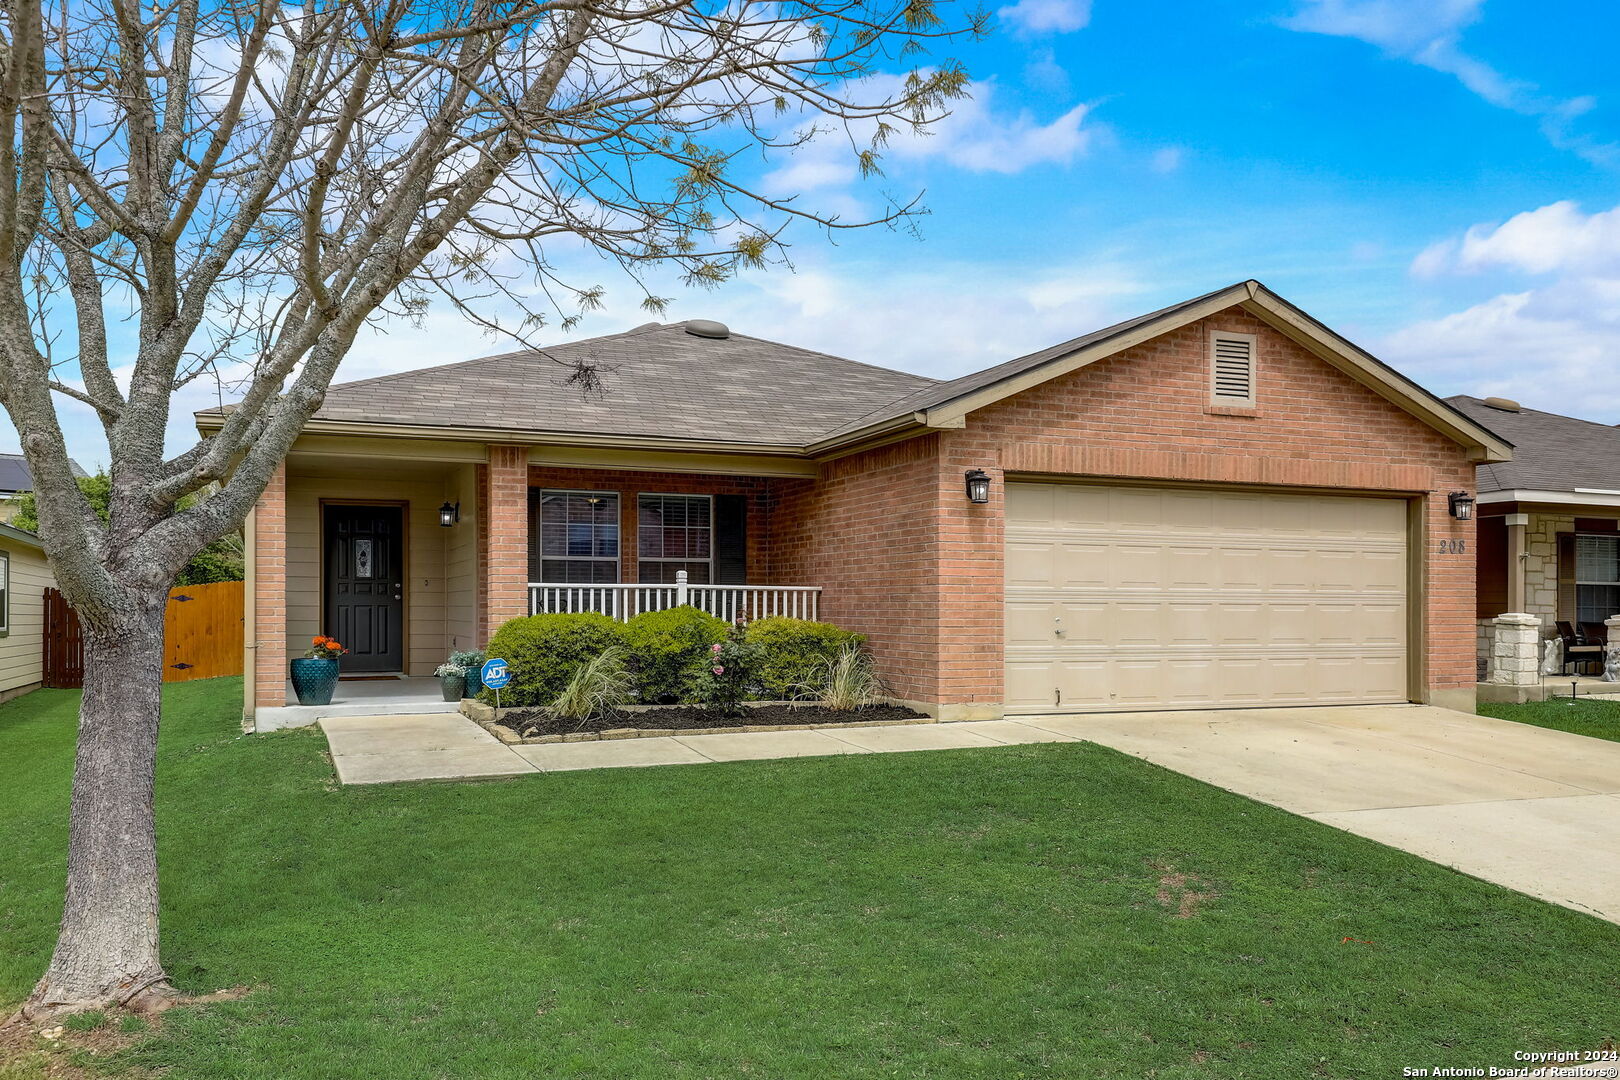 Photo of 208 Willow Crst in Cibolo, TX